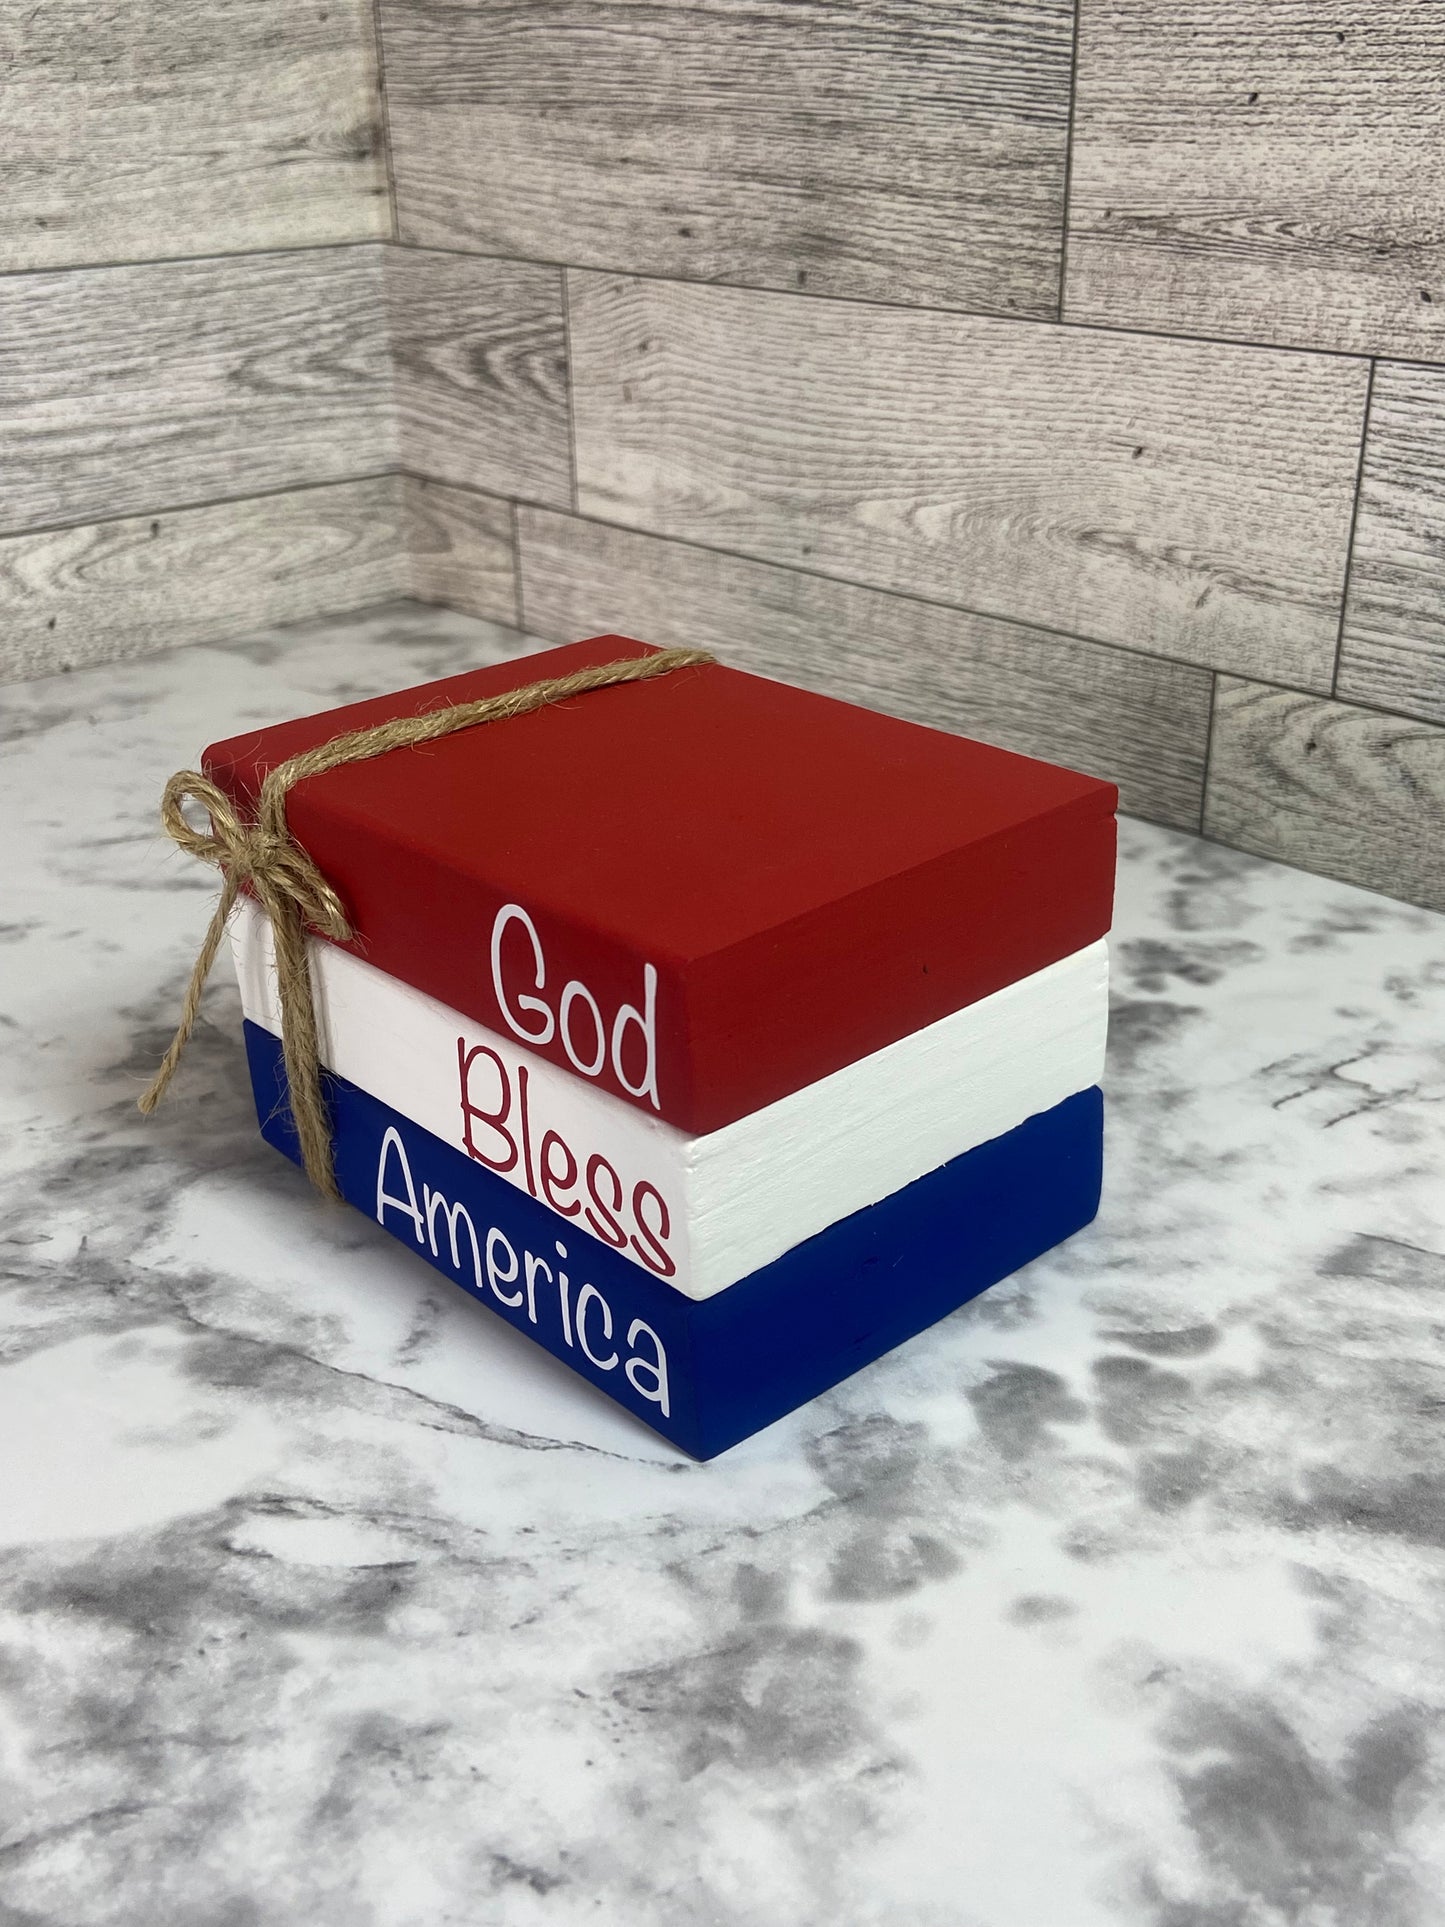 God Bless America - Medium Tiered Tray Book Stack